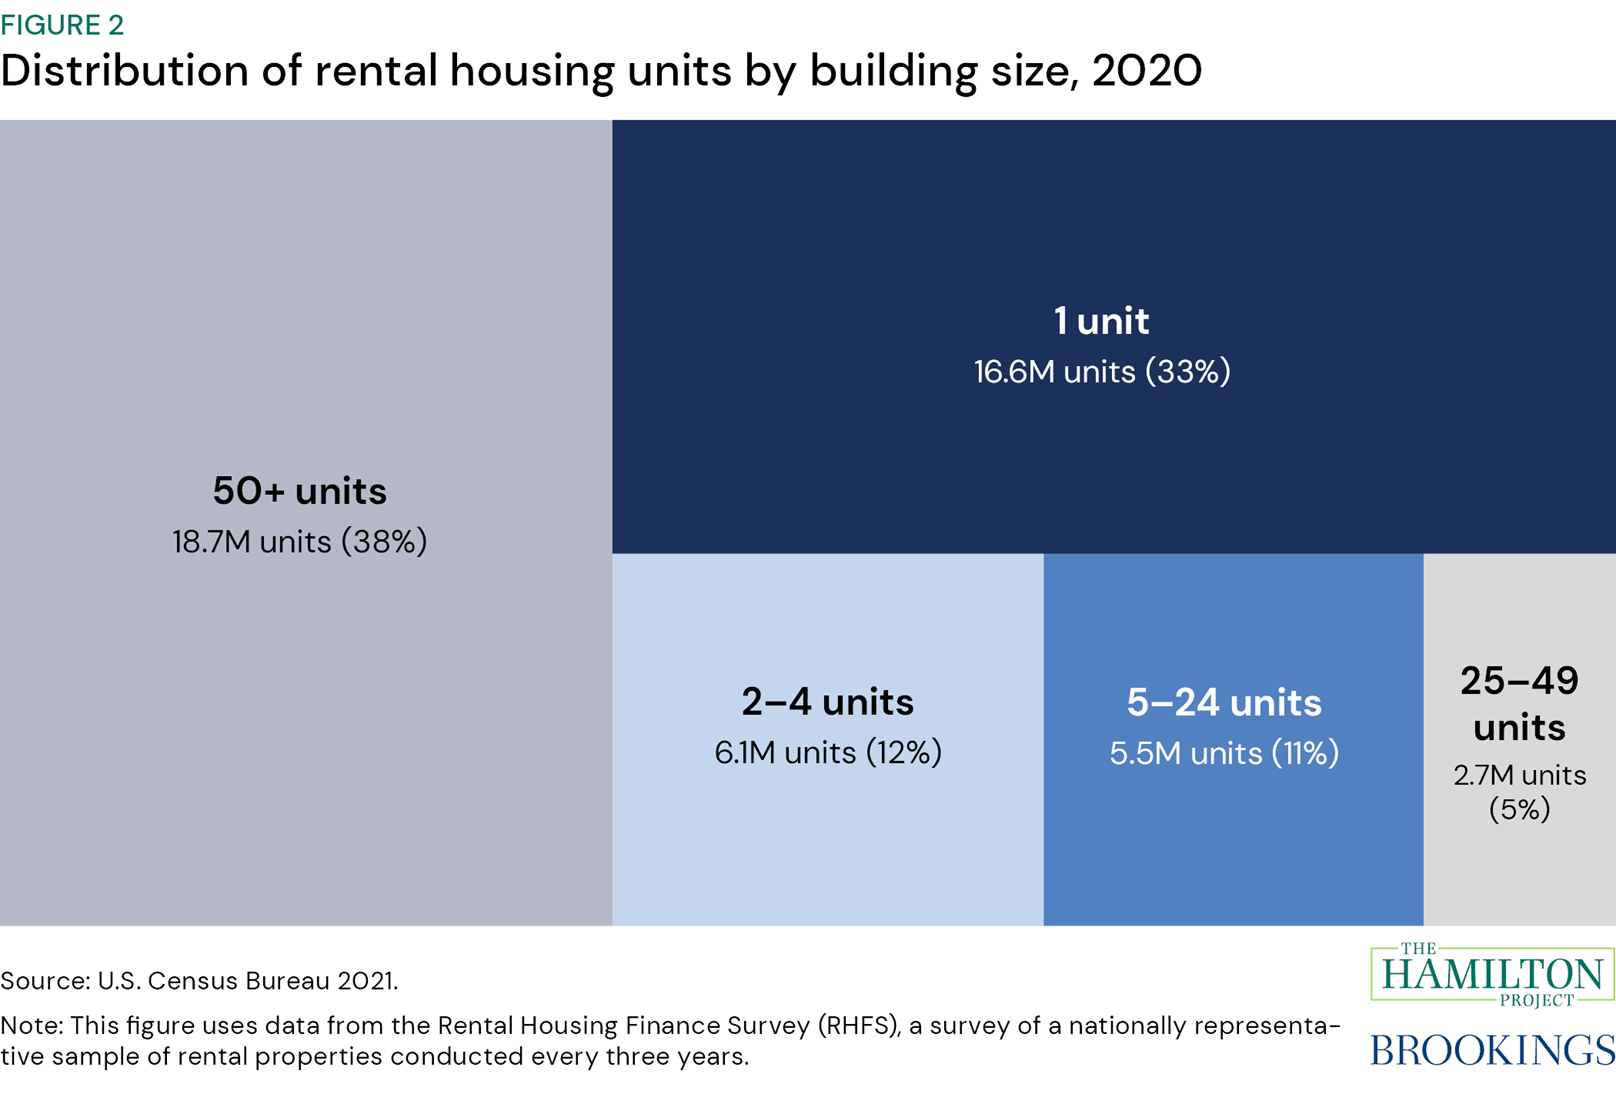 Figure 2: Distribution of rental housing units by building size, 2020. Figure 2 shows the distribution of rental units across the U.S. by building size in 2020 using the U.S. Census Bureau’s (2021) Rental Housing Finance Survey (RHFS). In 2020 there were somewhat fewer single-unit rental units (16.6 million) than rental units in buildings with more than 50 units (18.7 million); together those two categories represented 71 percent of rental properties.